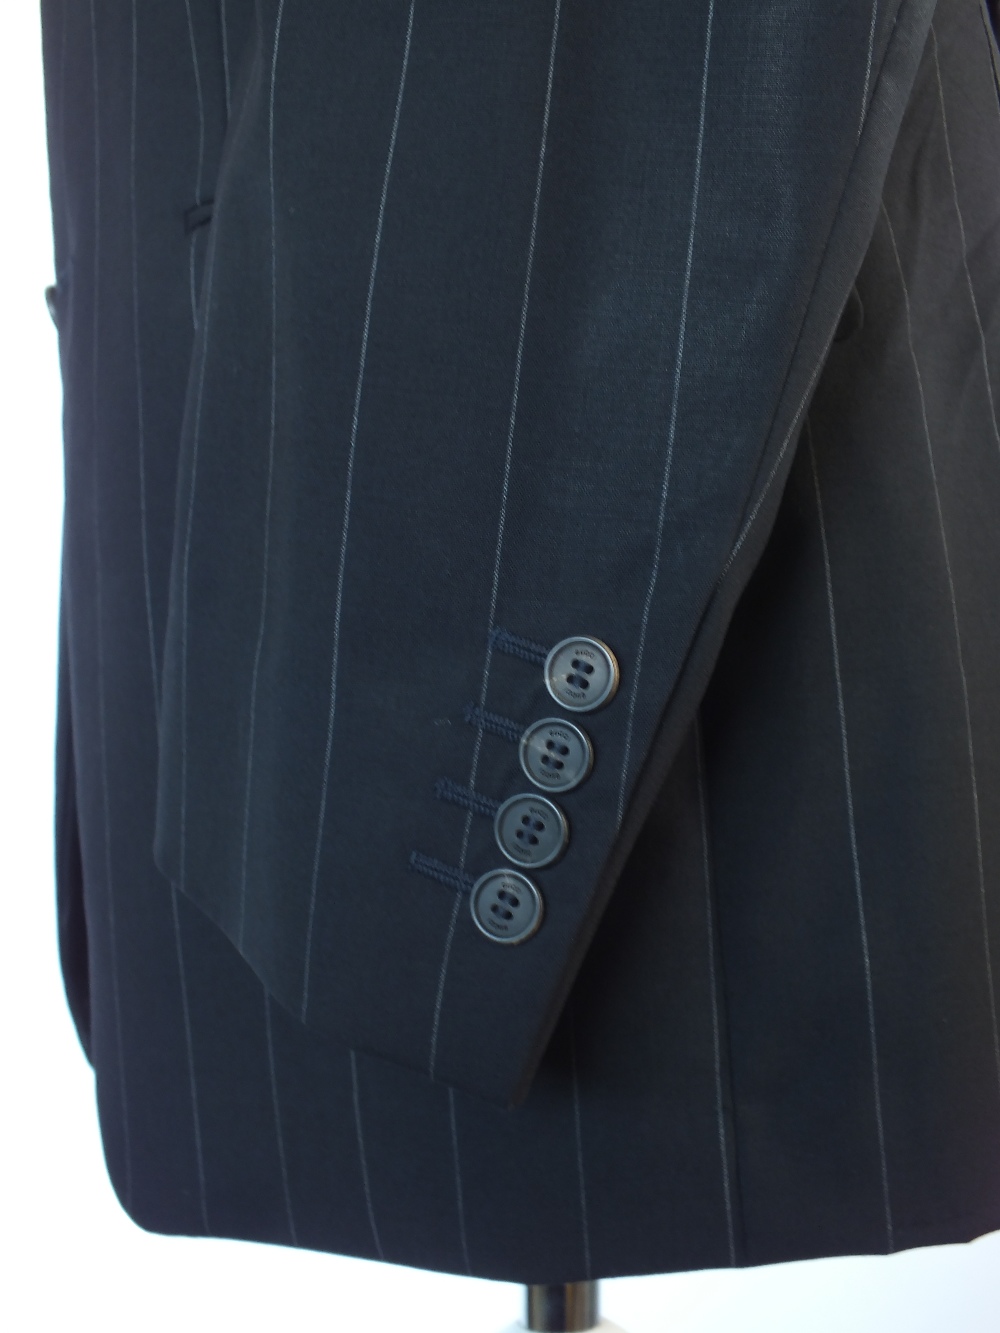 A Gucci suit navy blue pinstripe, double vent, Italian size 50R, 97% wool, 3% elastine, flat front - Image 6 of 7